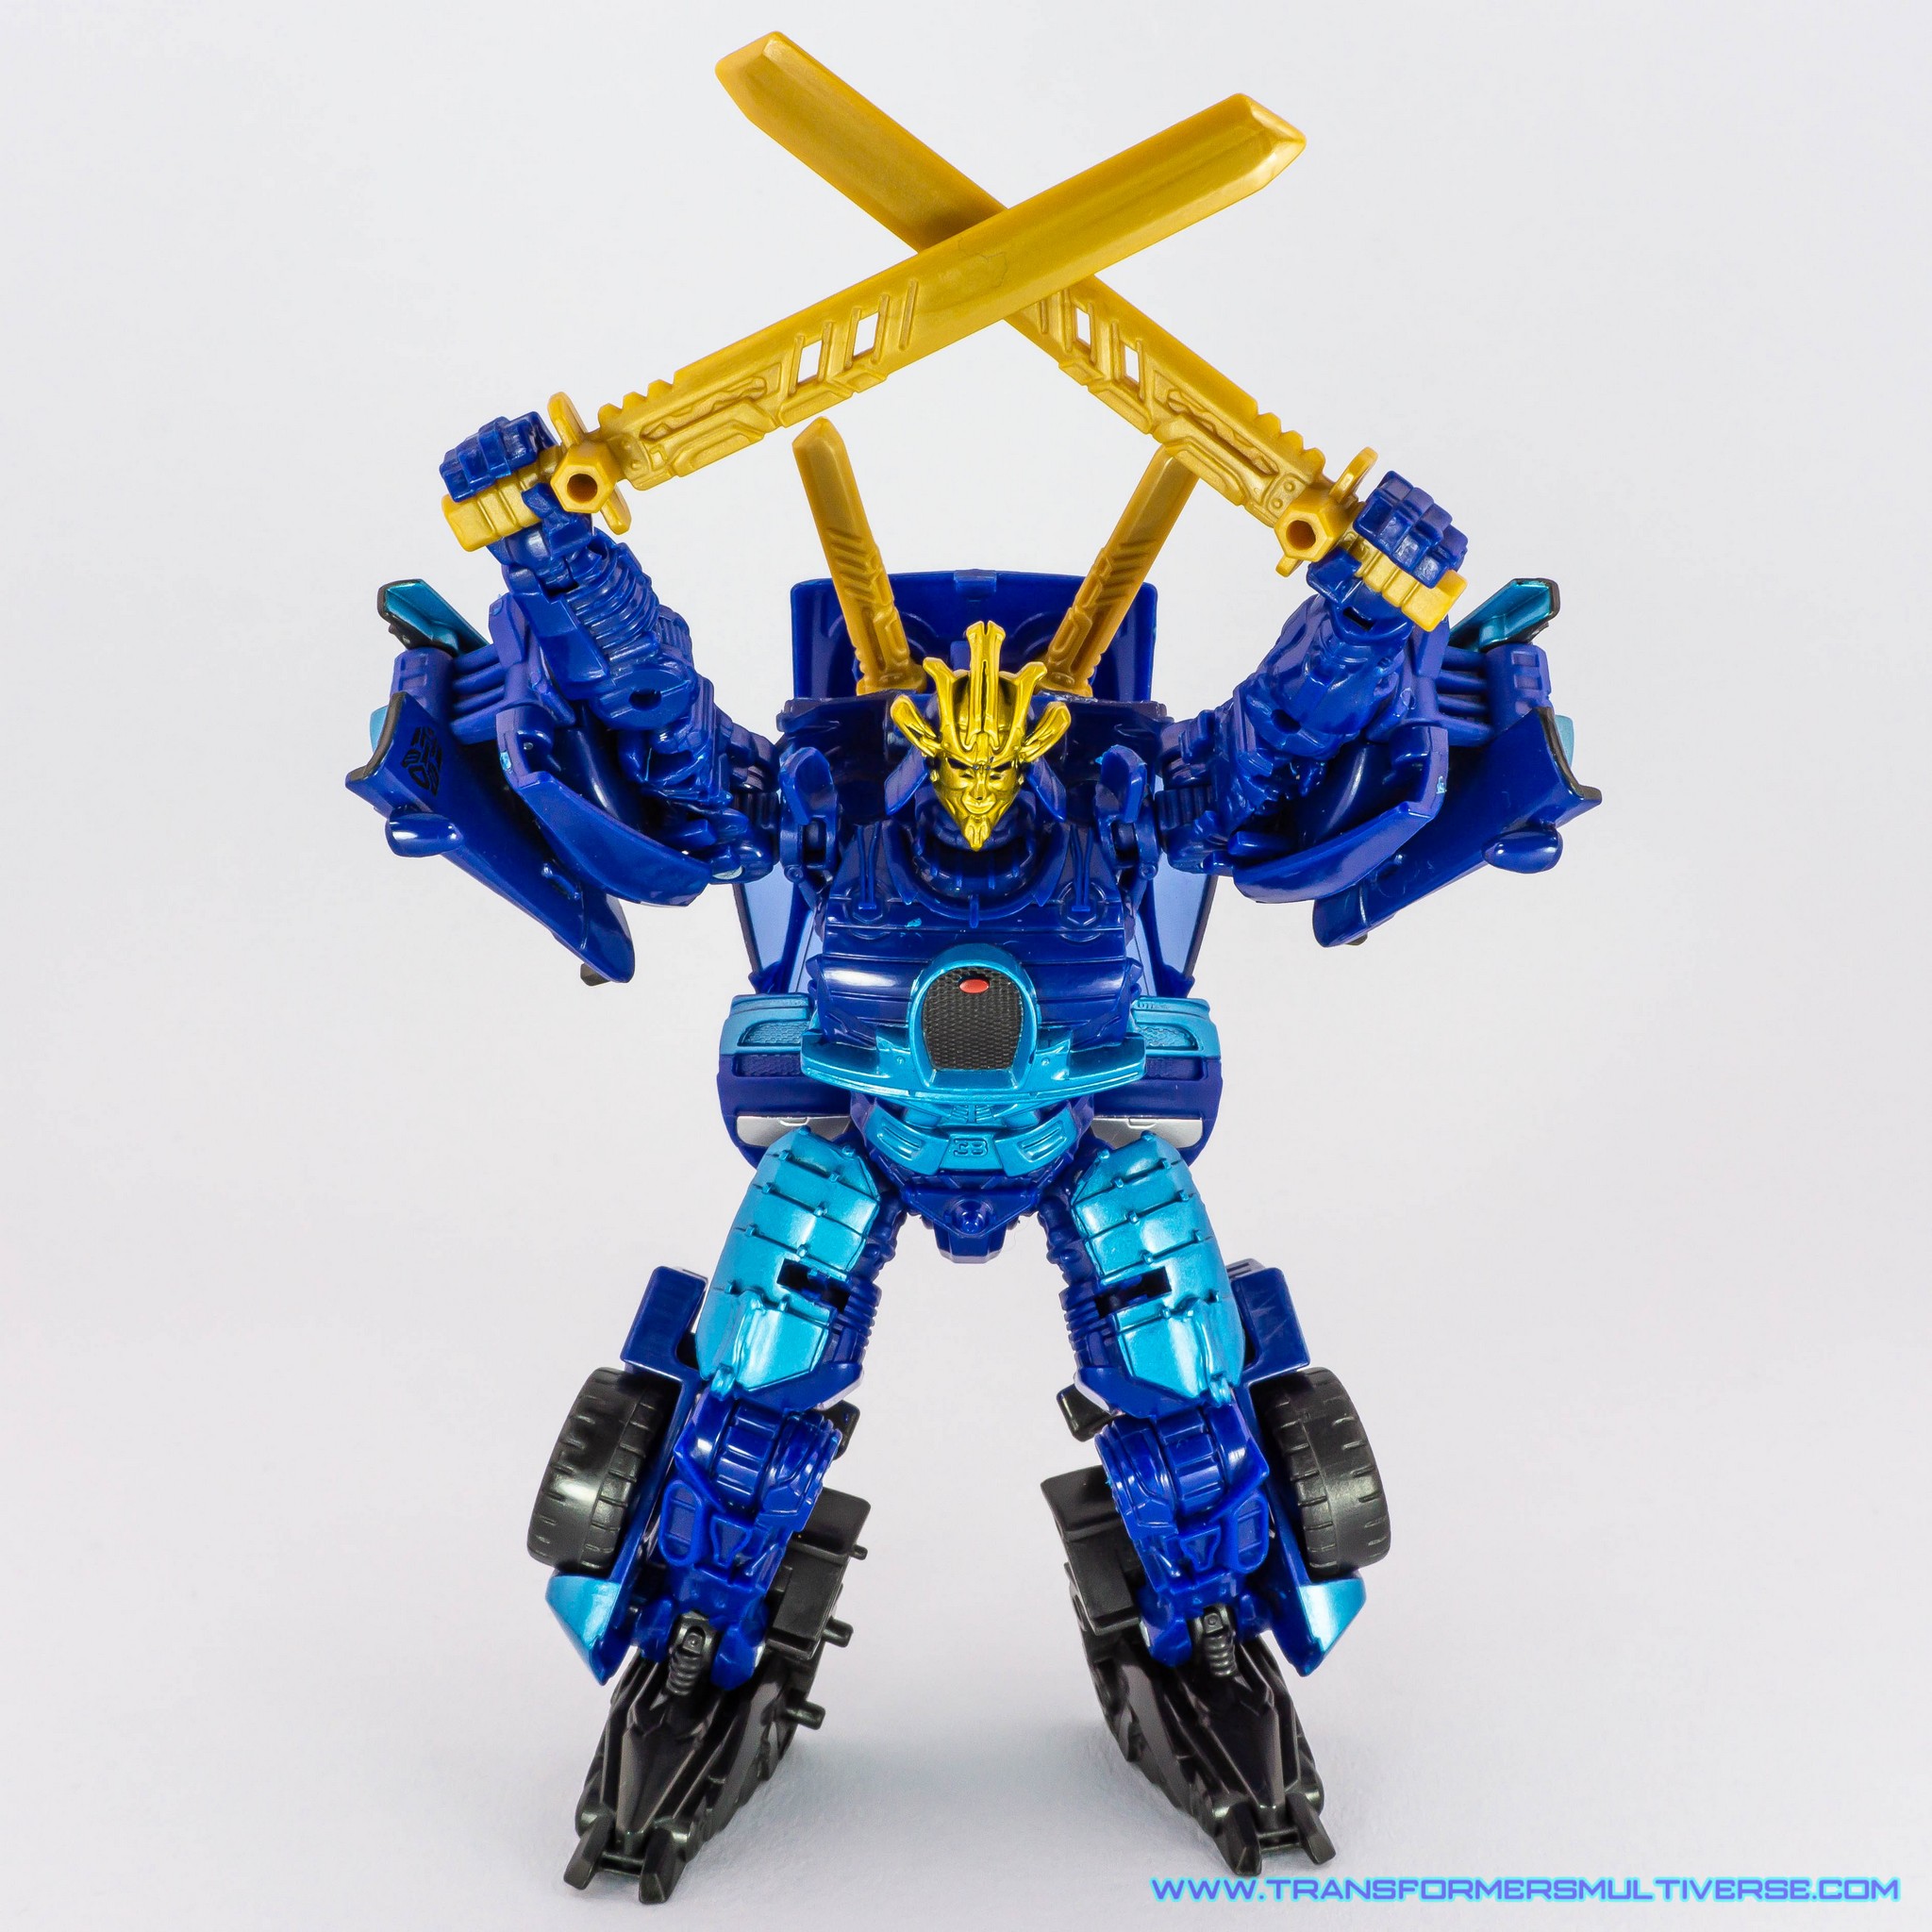 Transformers Age of Extinction Drift with swords, alternate pose 2